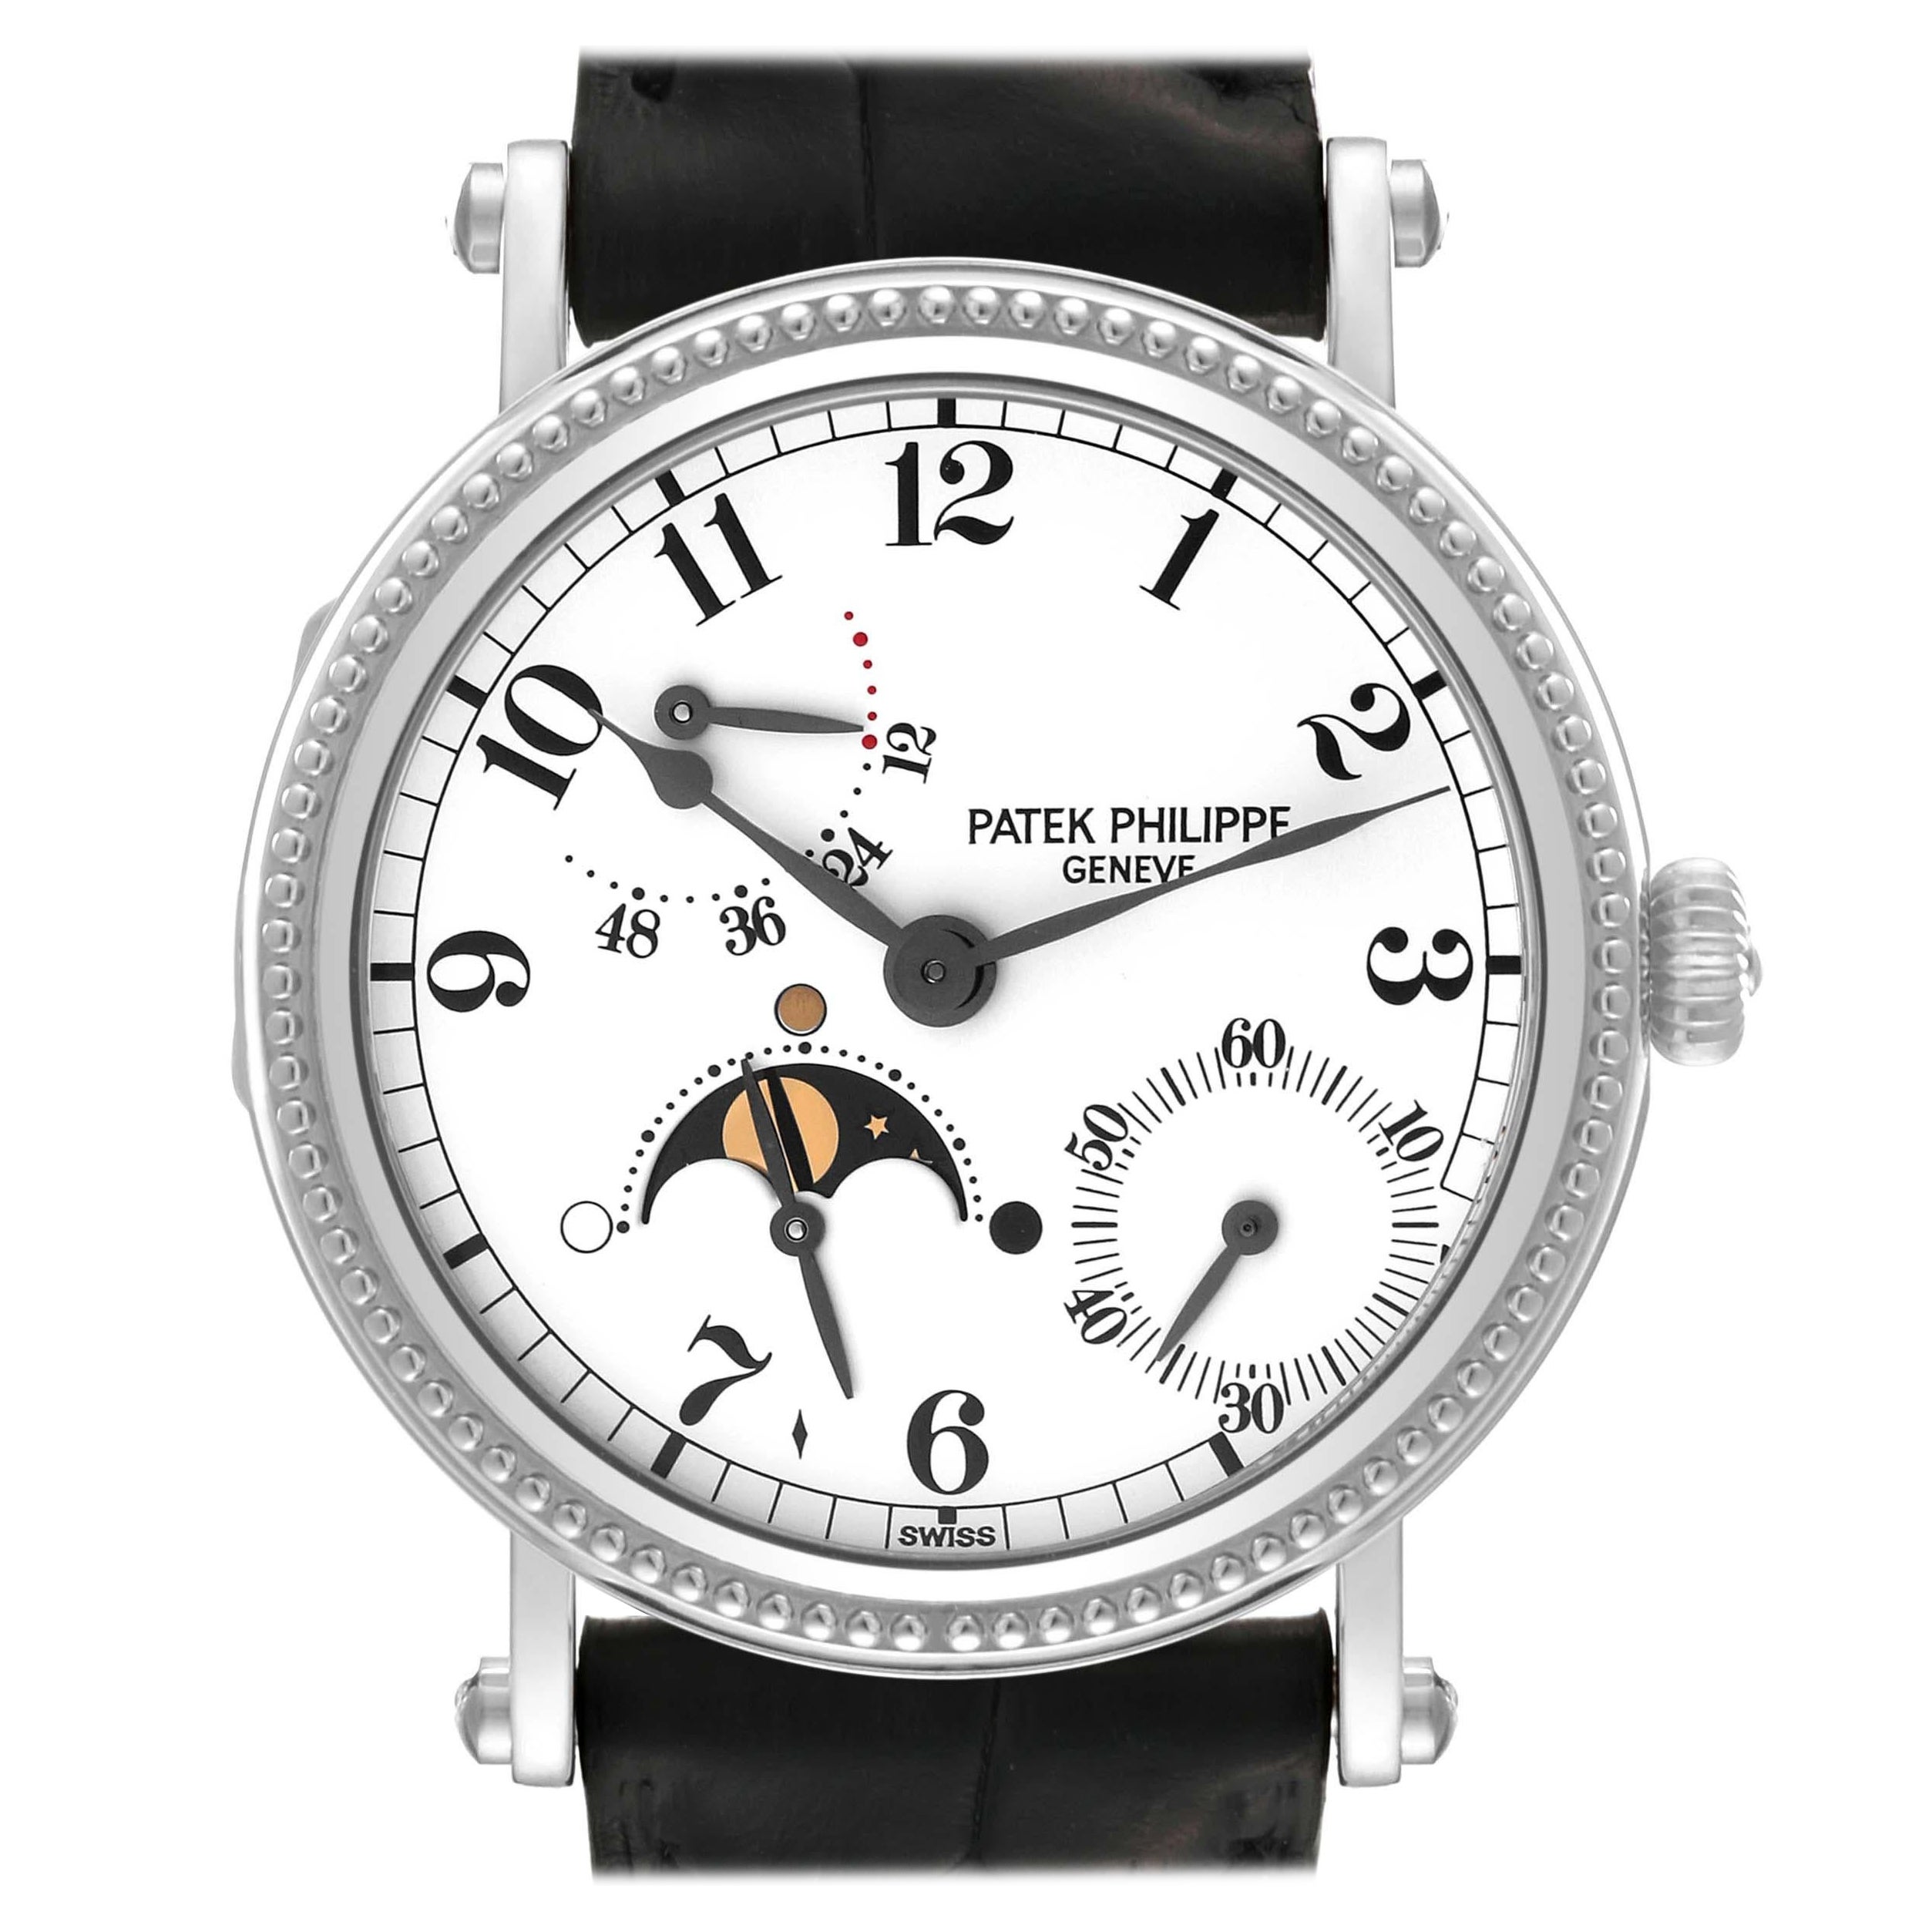 What is a moonphase watch?